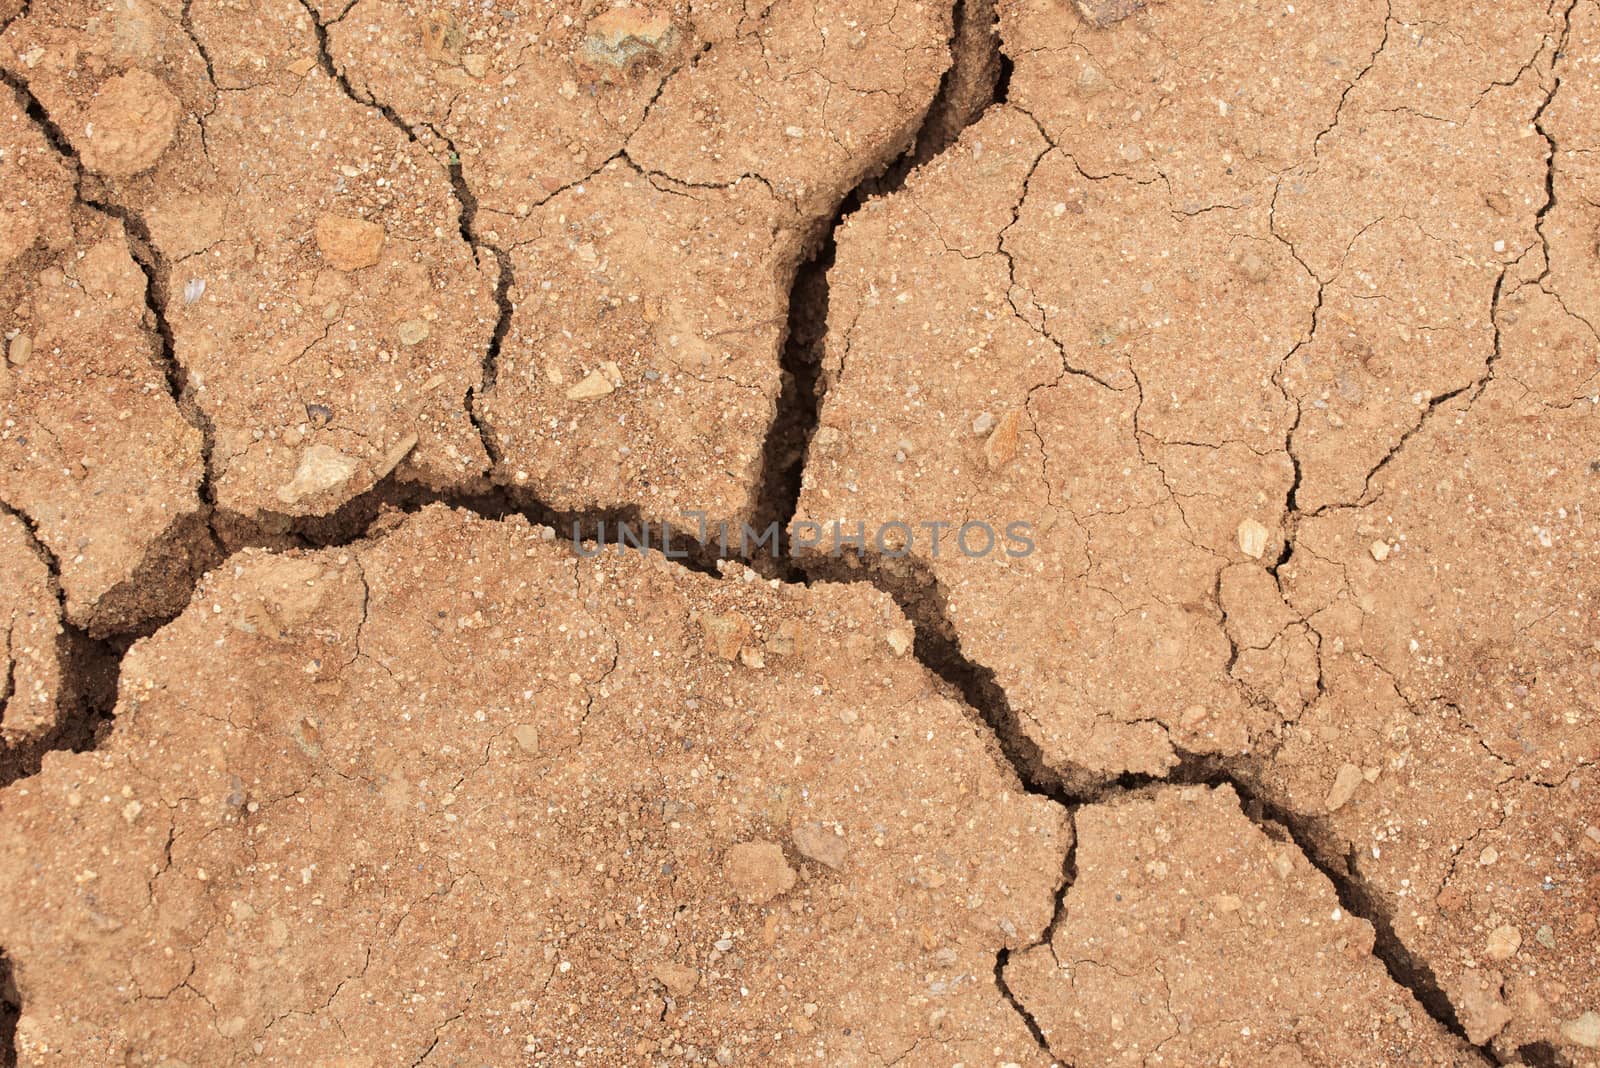 dry land with cracks by Visual-Content